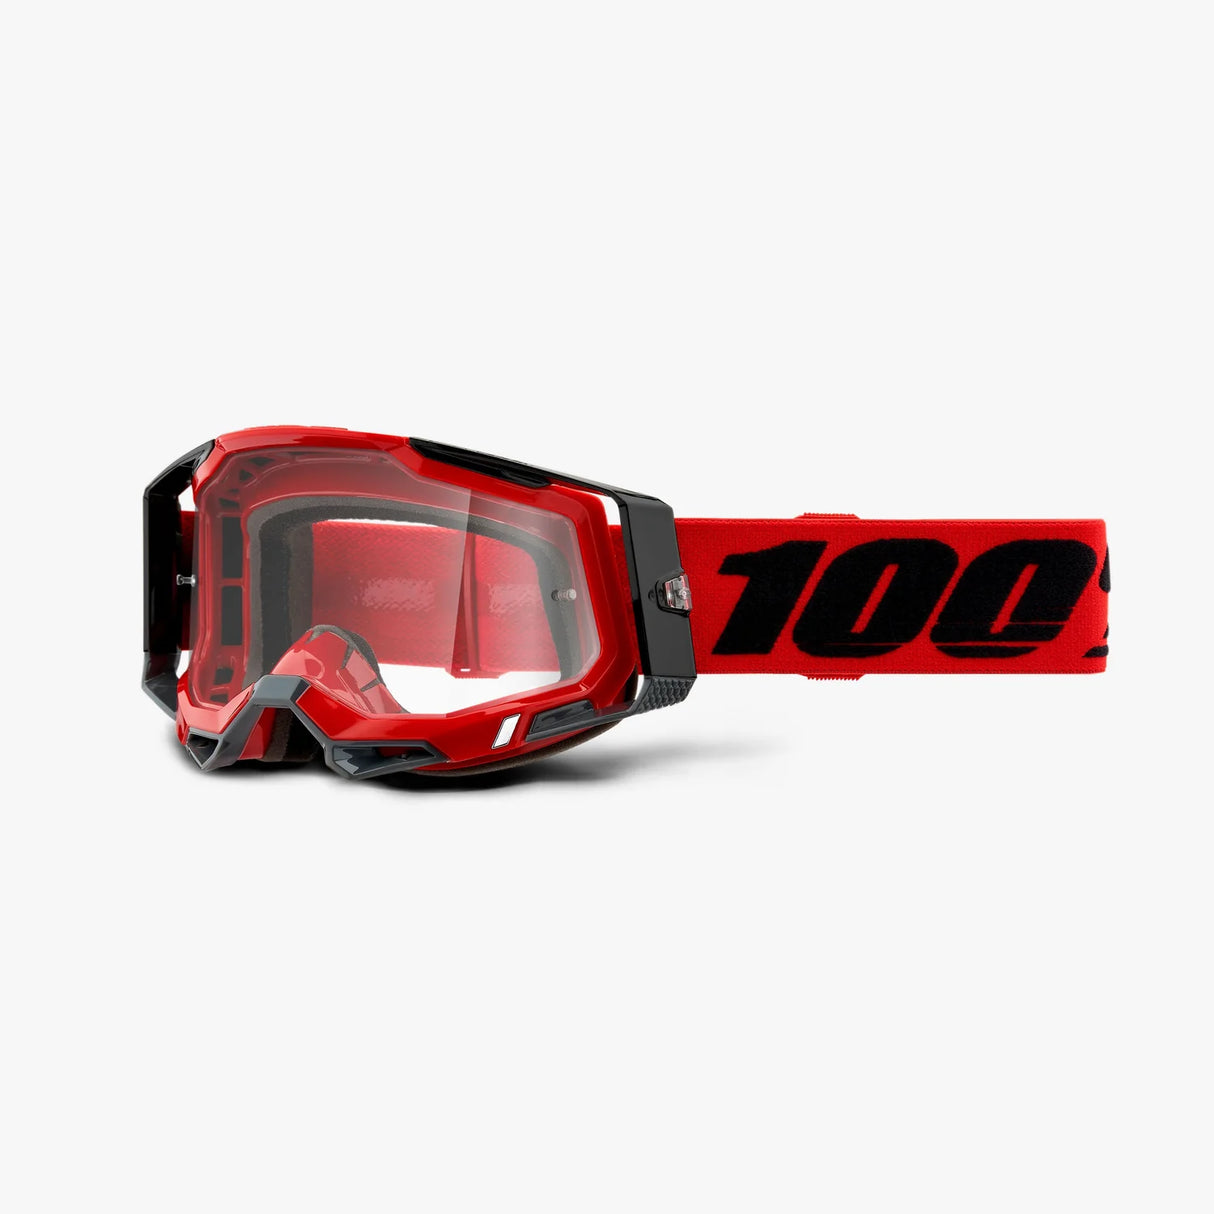 RACECRAFT 2 GOGGLE RED (CLEAR LENS)